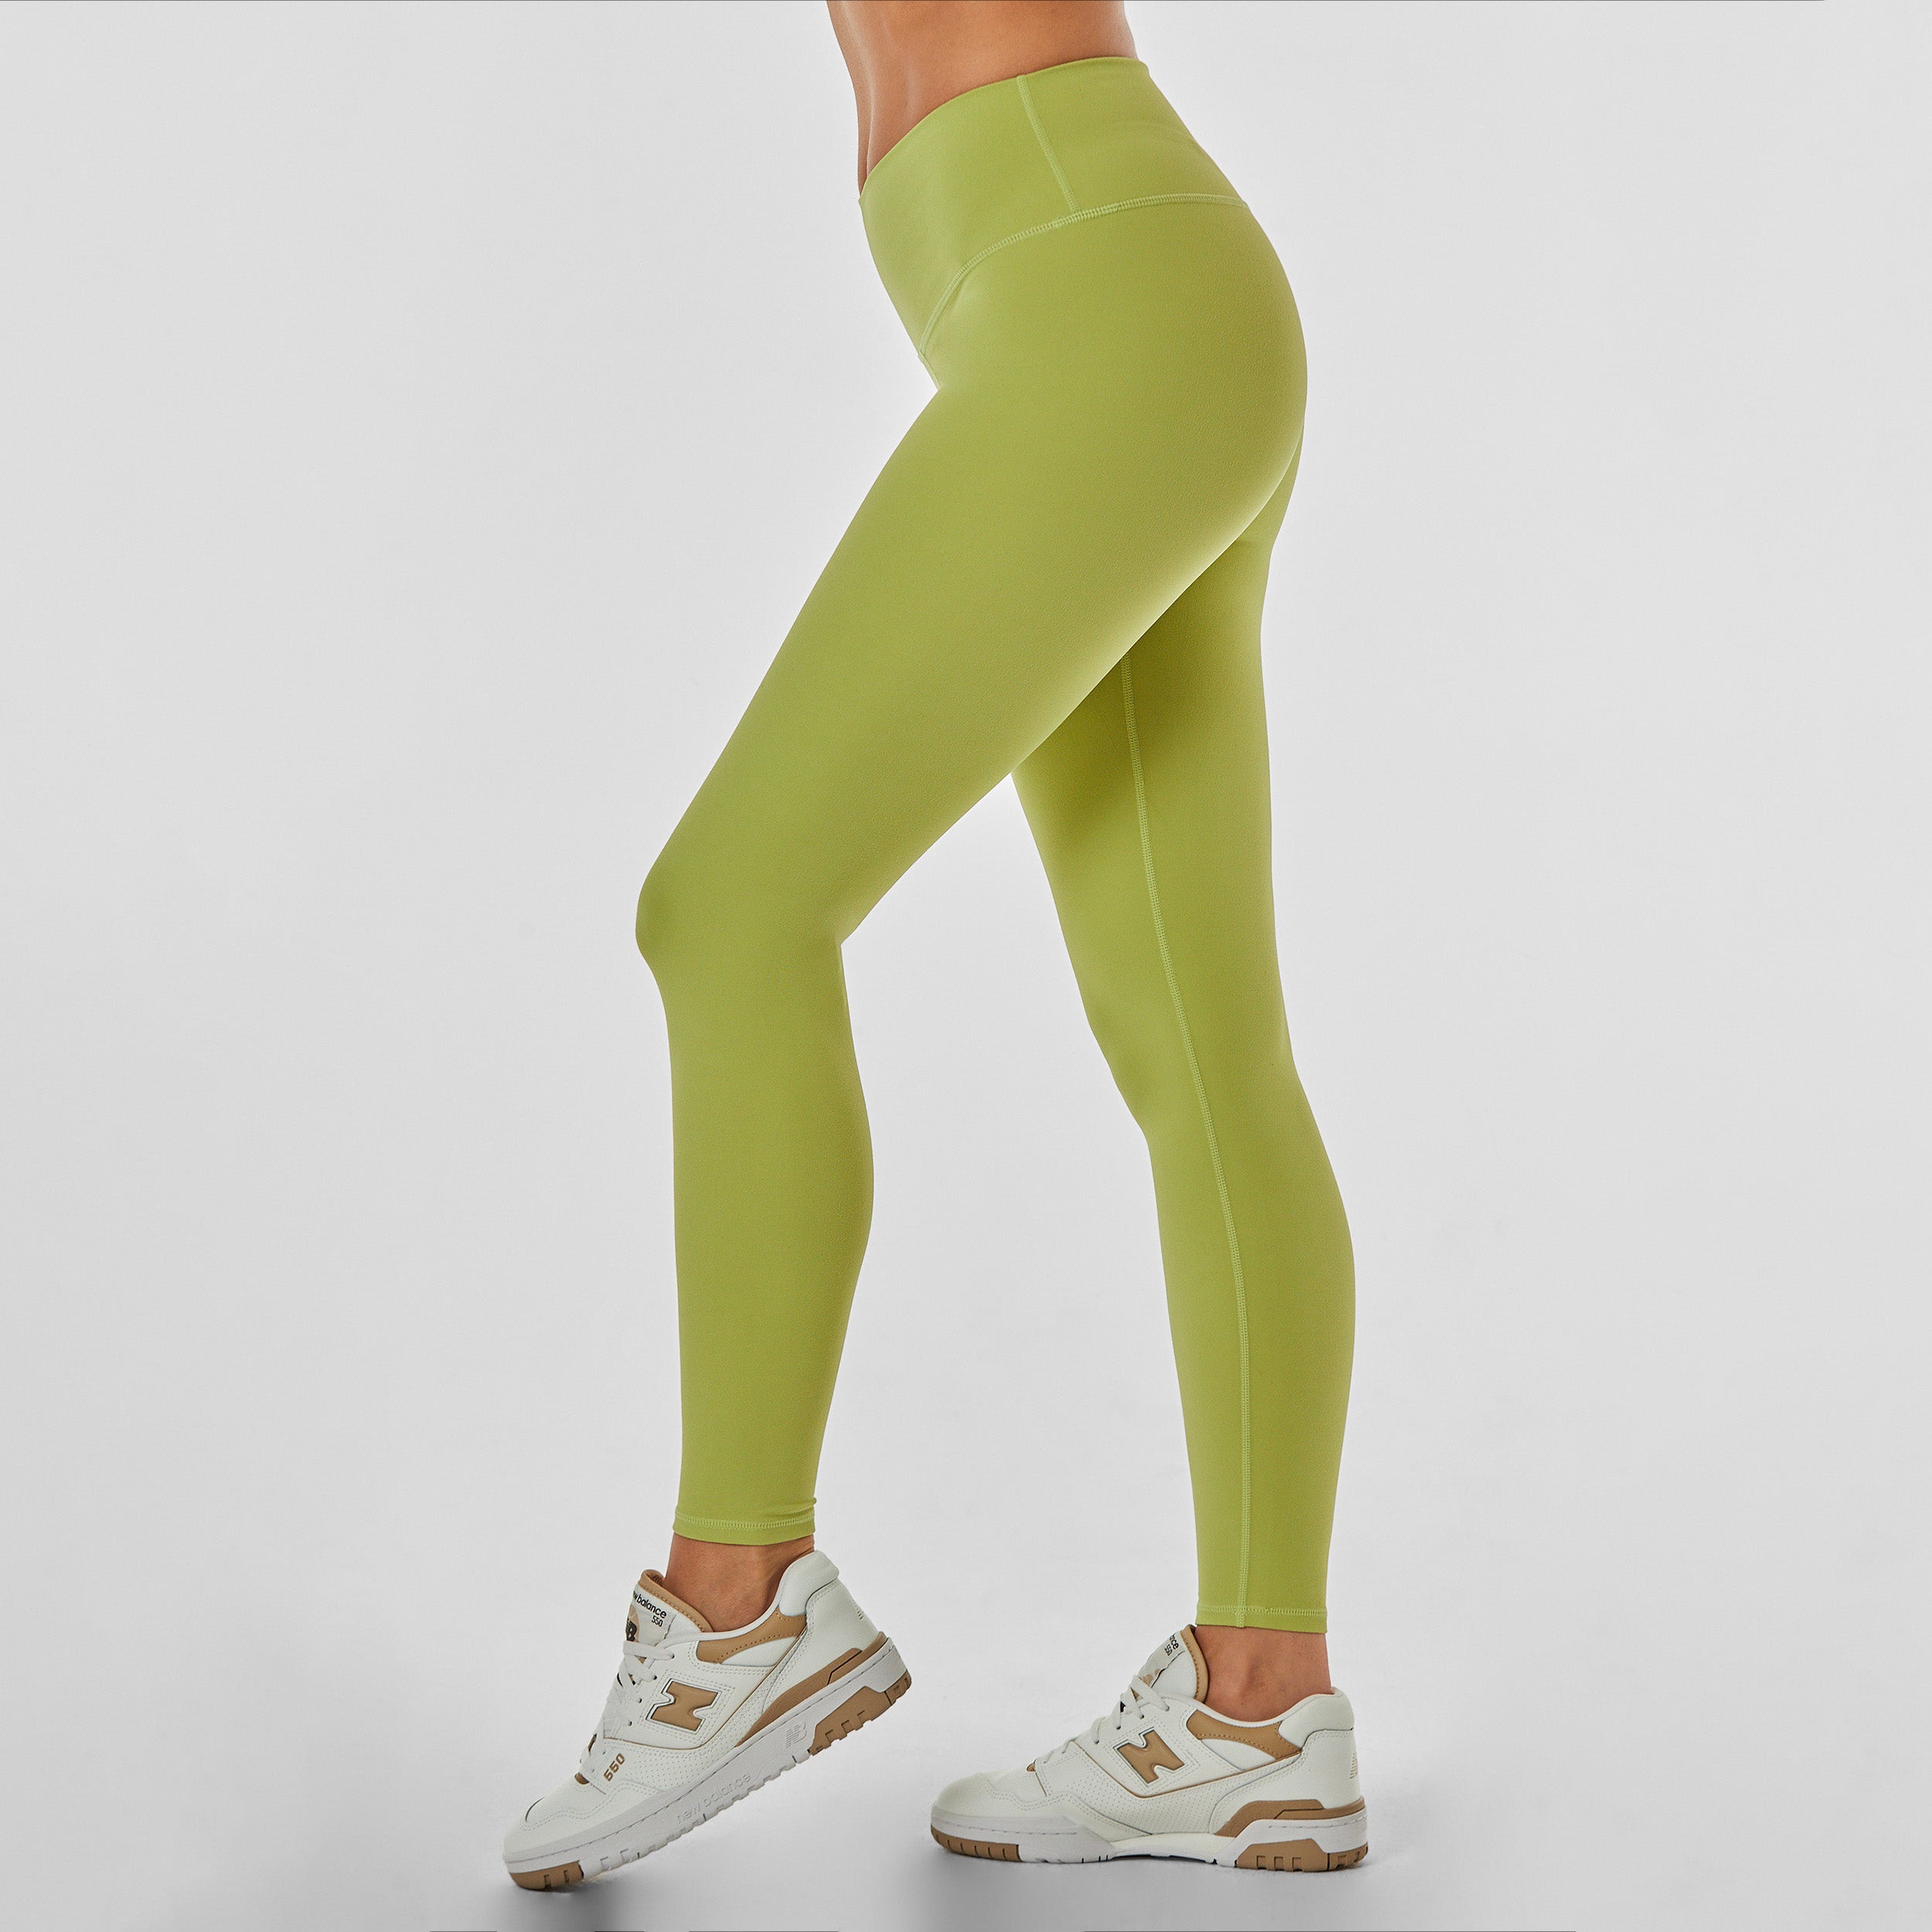 Side view of woman wearing sculpting and flattering green legging